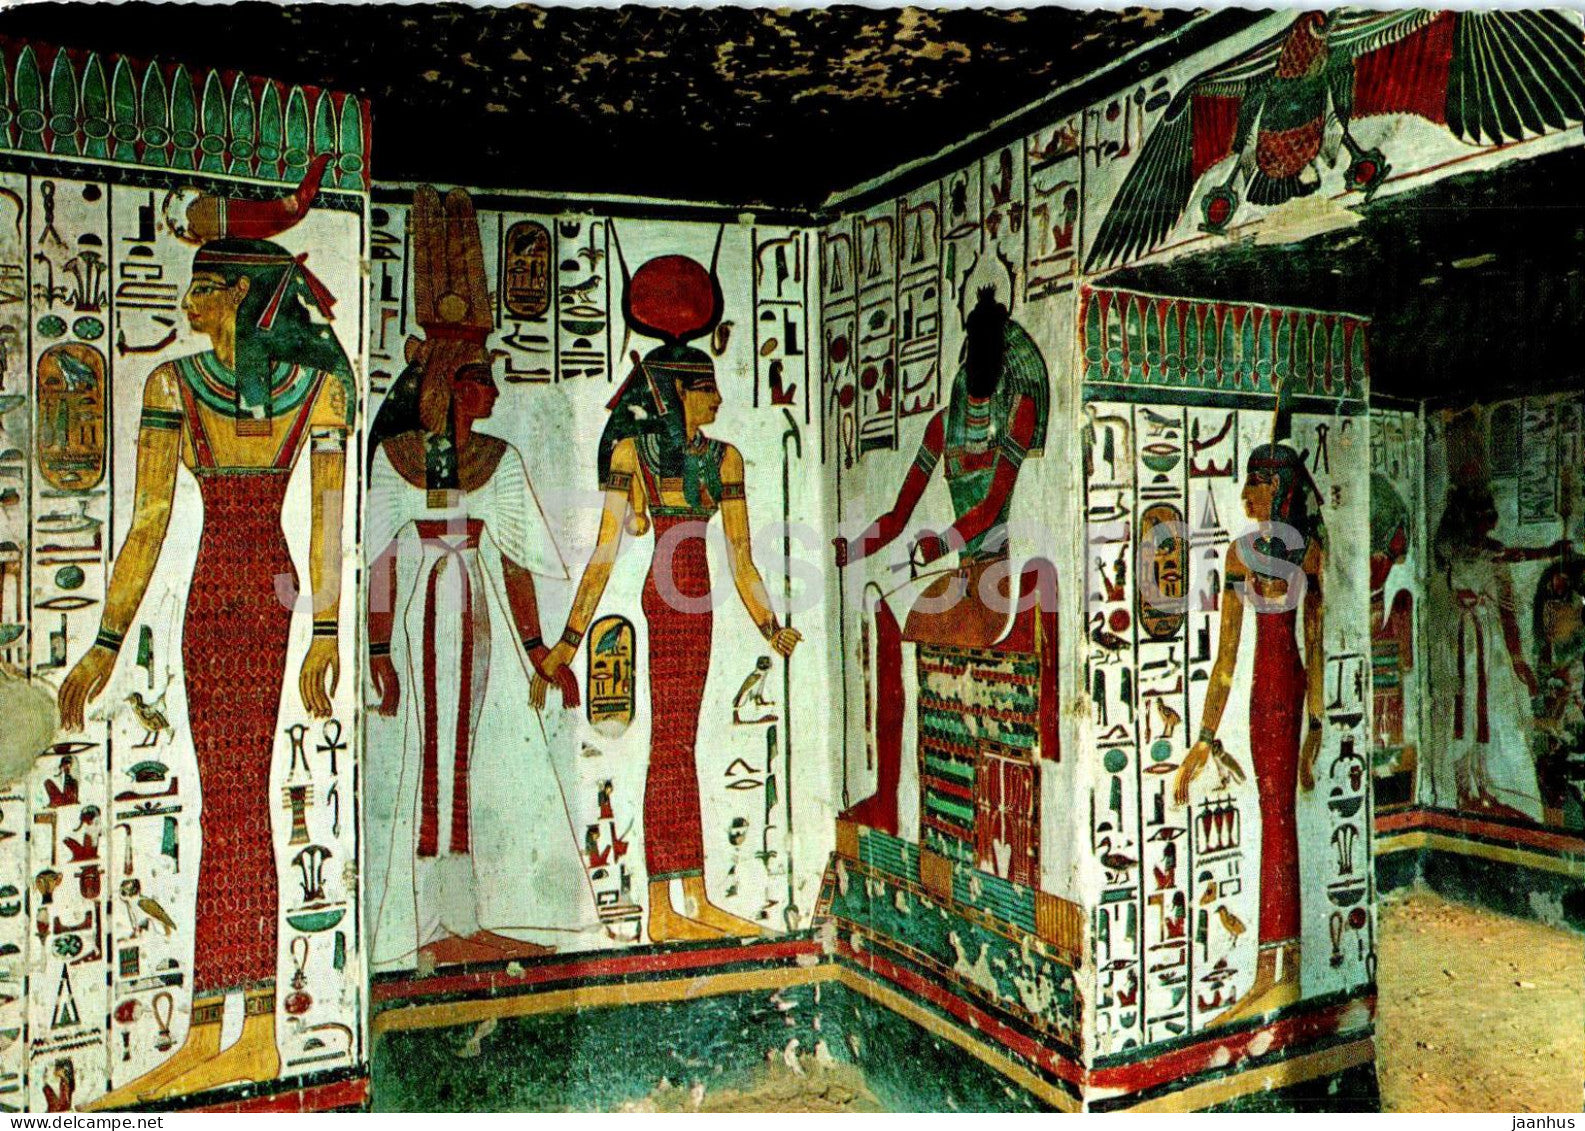 Luxor - Queen's Valley - Painted Relief in the Tomb of Nefertari - ancient world - 747/26 - Egypt - unused - JH Postcards